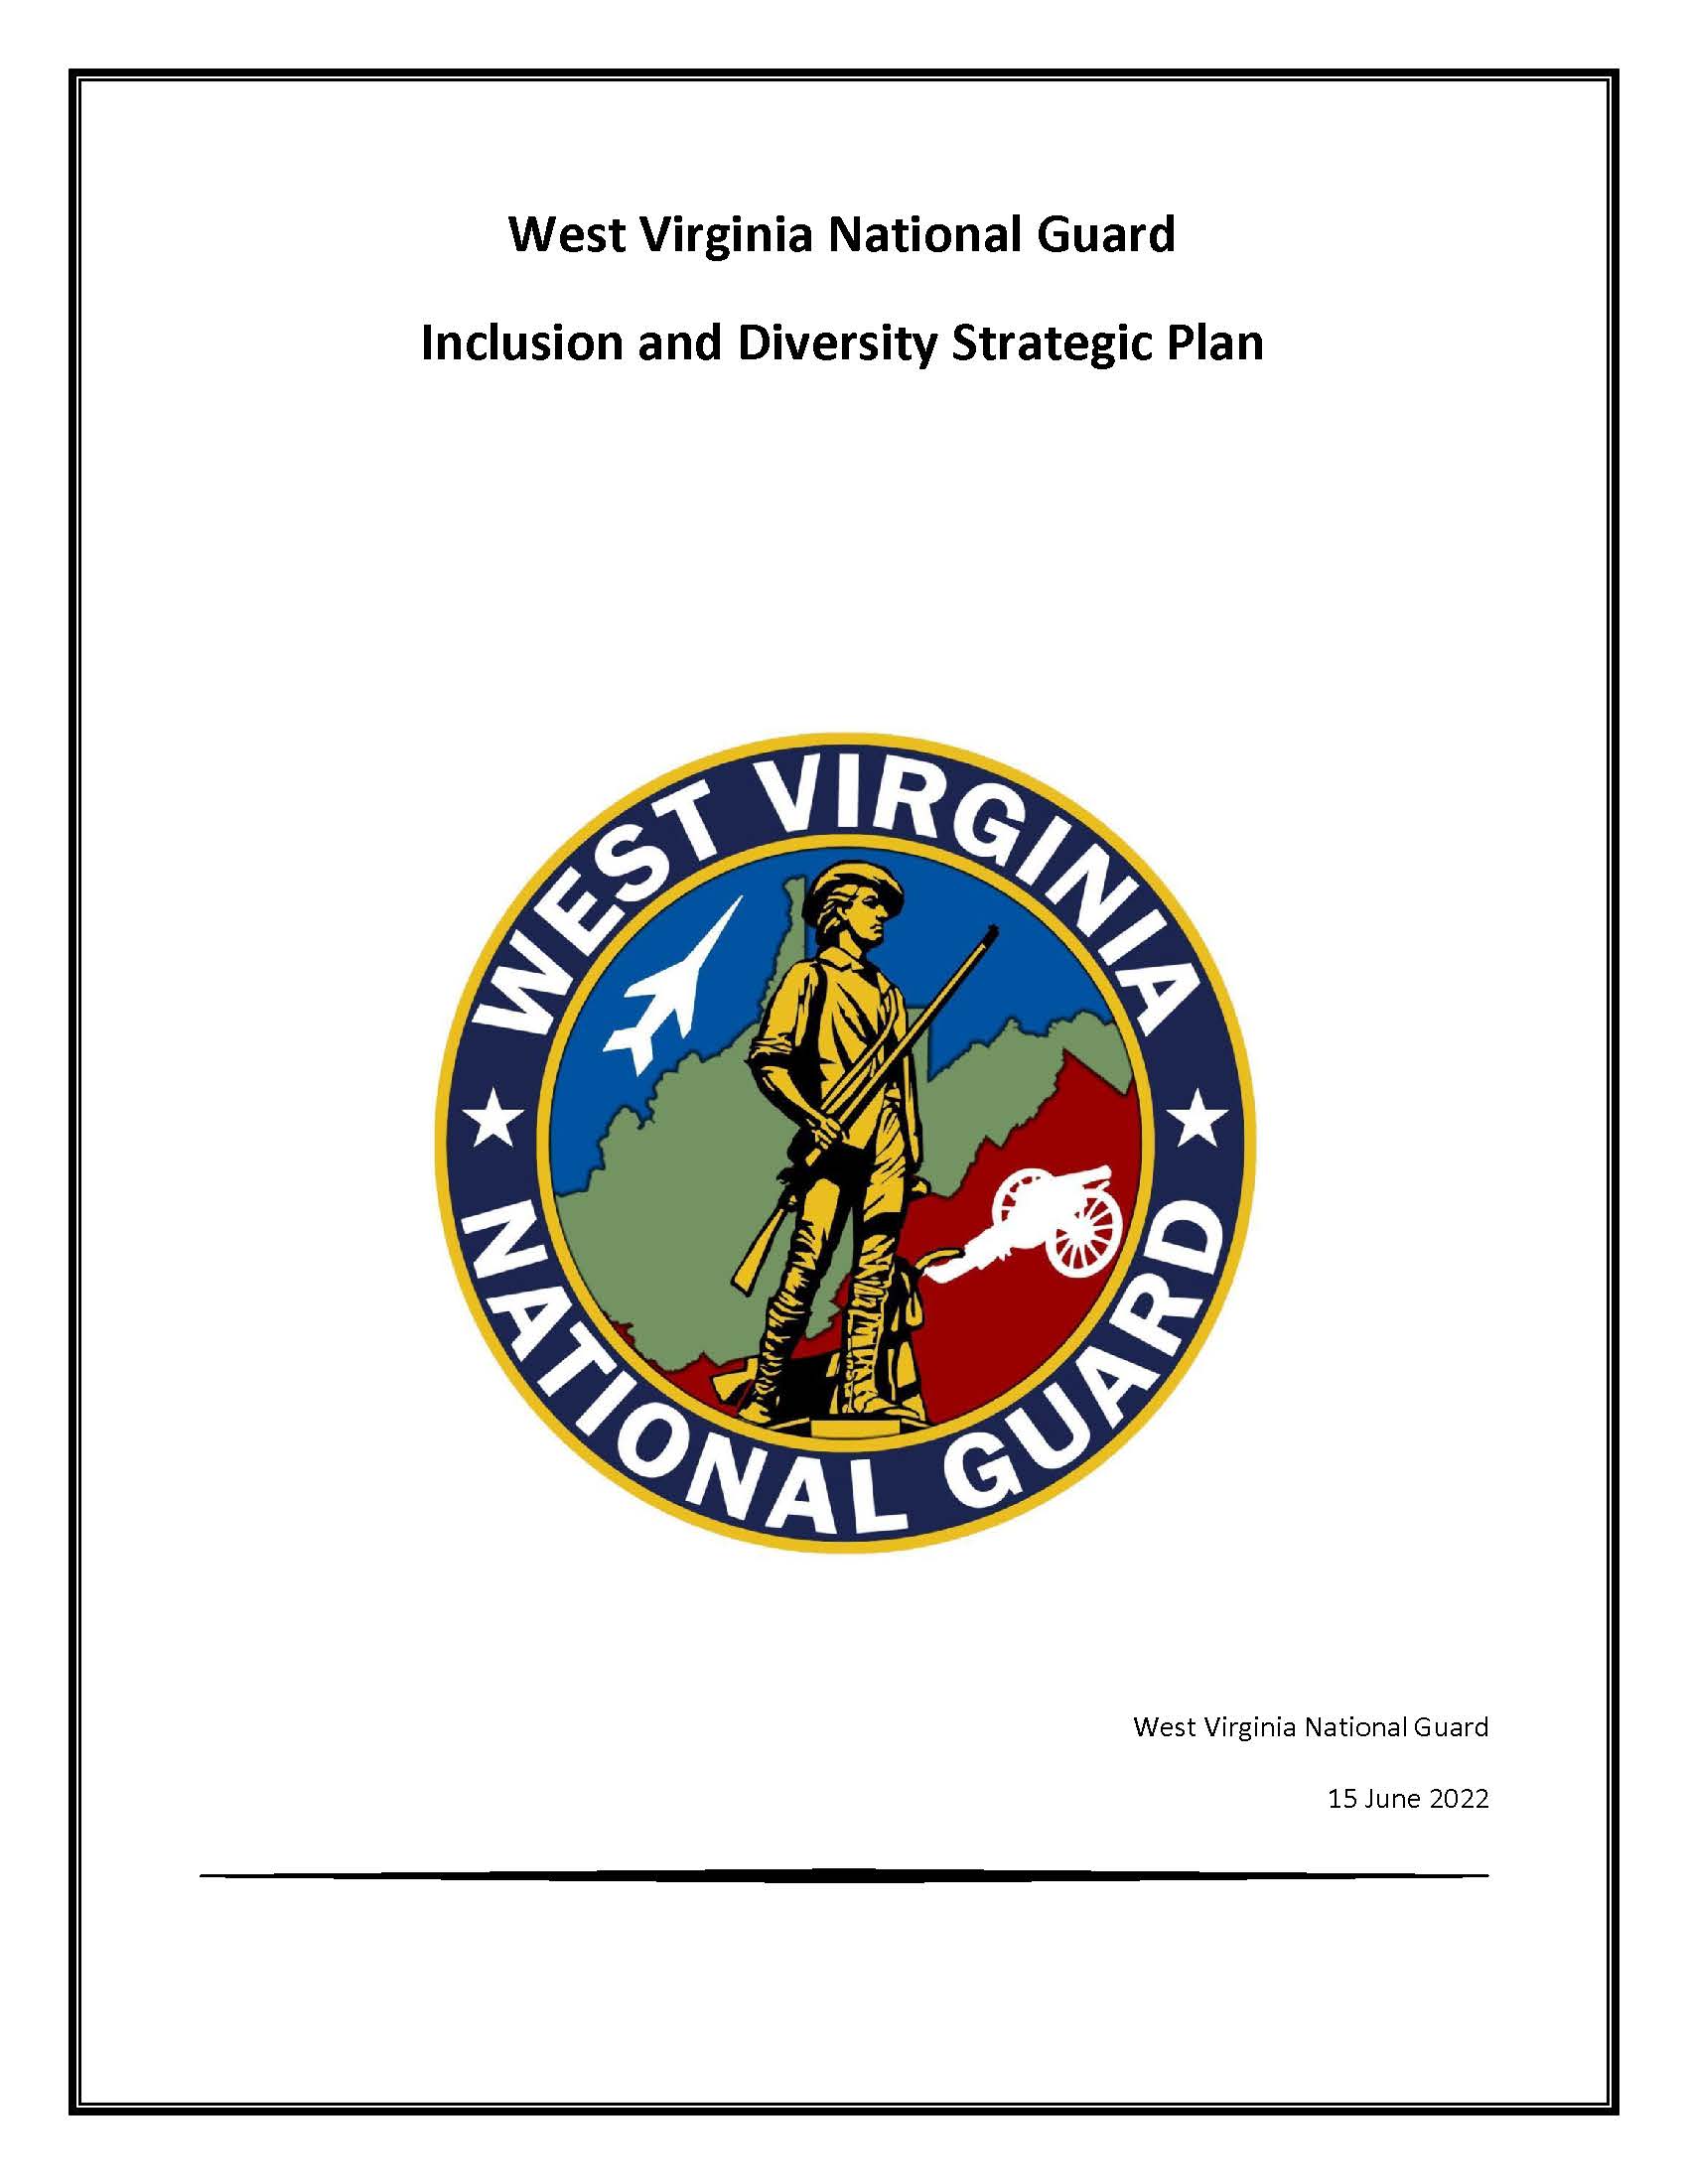 WVNG Inclusion & Diversity Plan